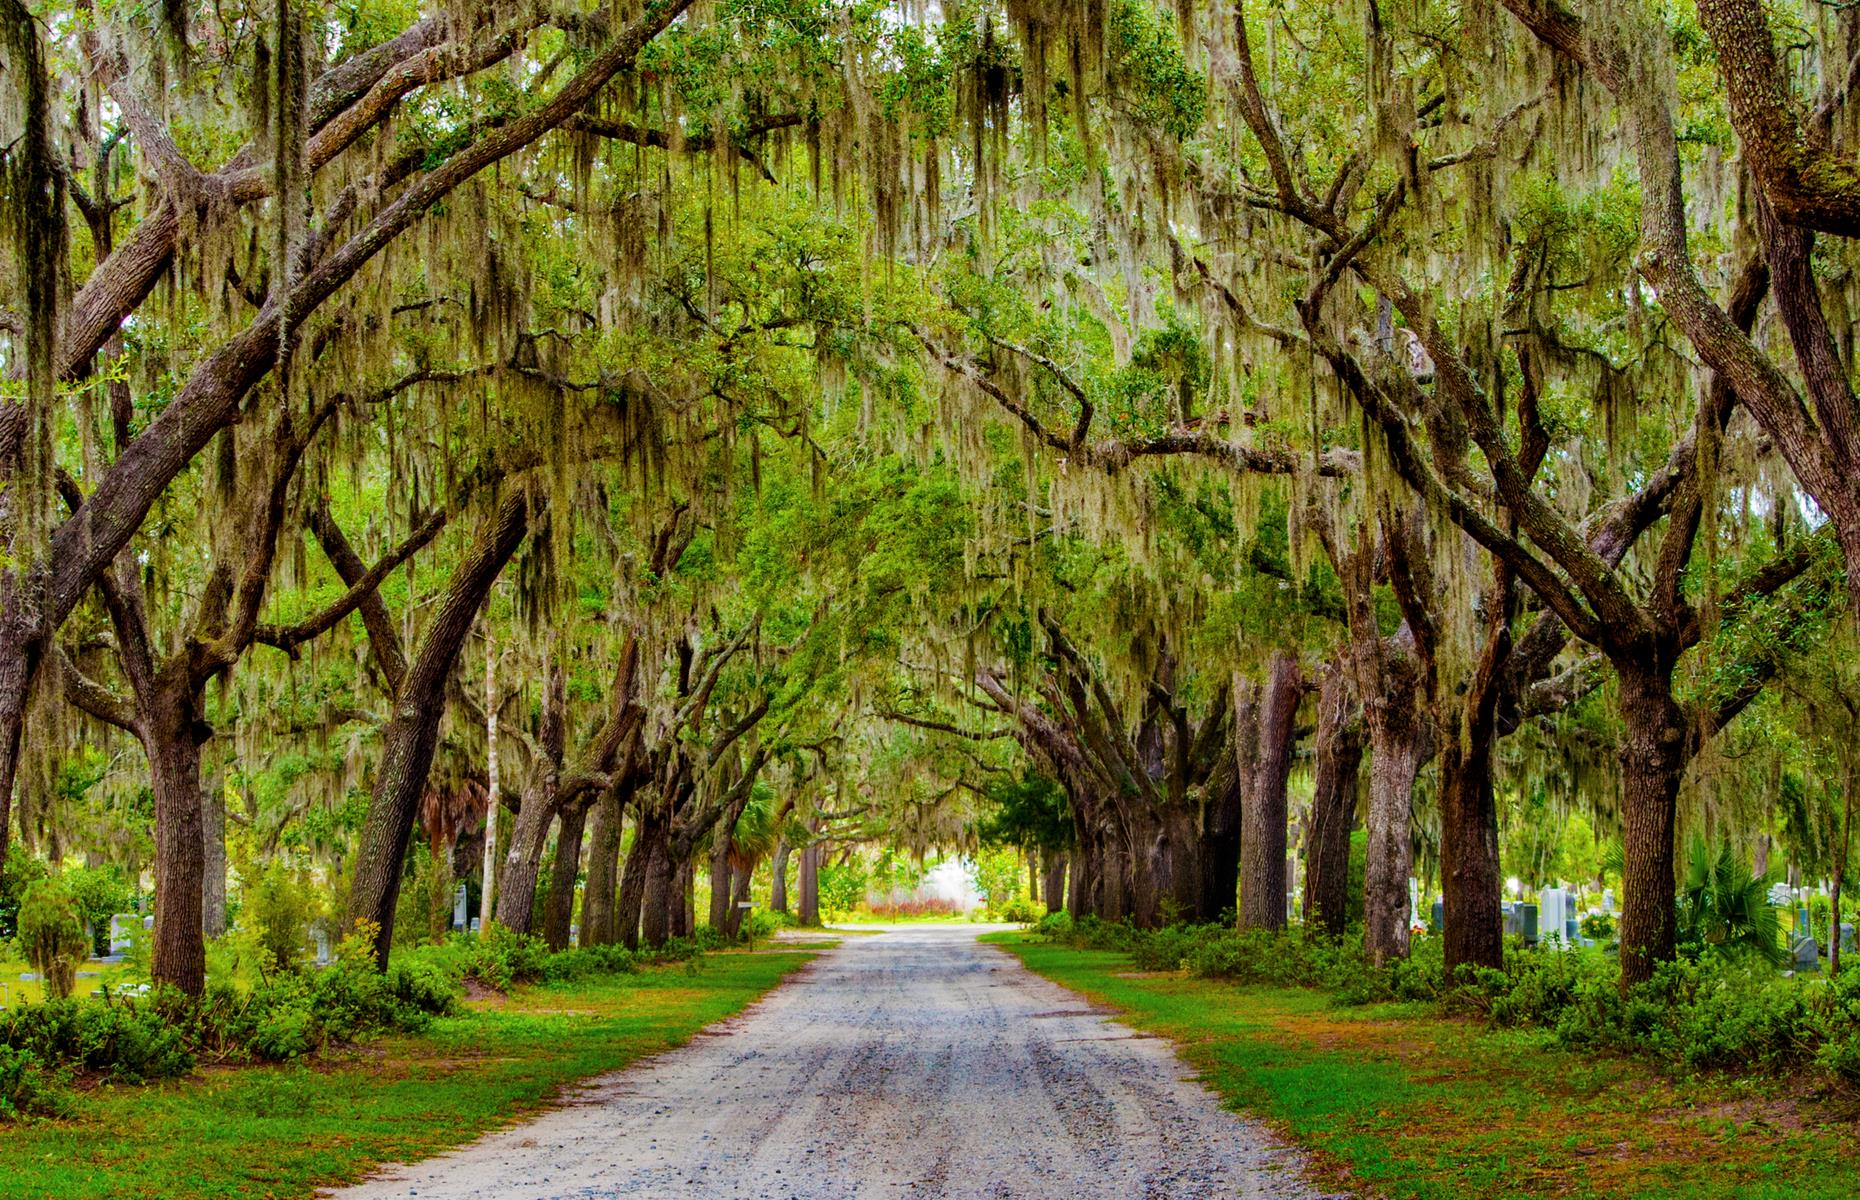 <p>Southern charmer Savannah is far easier to admire outside of the summer months. Even January temperatures <a href="https://en.climate-data.org/north-america/united-states-of-america/georgia/savannah-1664/">reach 59°F (15°C)</a>, while the mercury often hits 77°F (25°C) in April. So visitors are unlikely to catch a chill, except perhaps while strolling around atmospheric cemeteries whose sculptures and grand mausoleums are shadowed by moss-draped oak trees.</p>